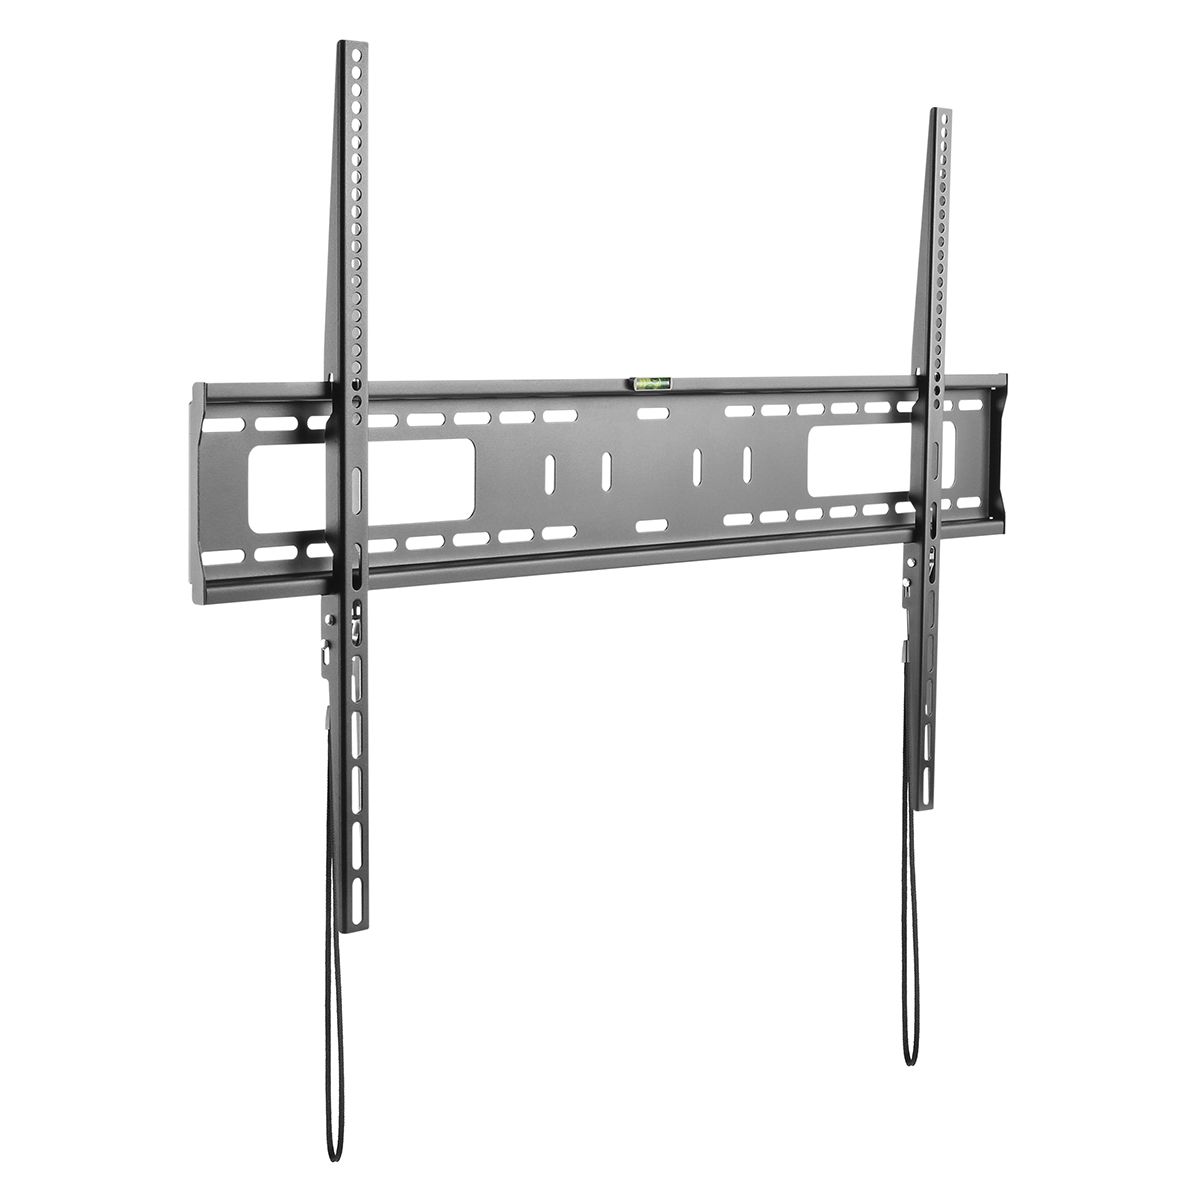 StarTech.com Wall Mounting Monitor Arm for 1 x Screen, 100in Screen Size